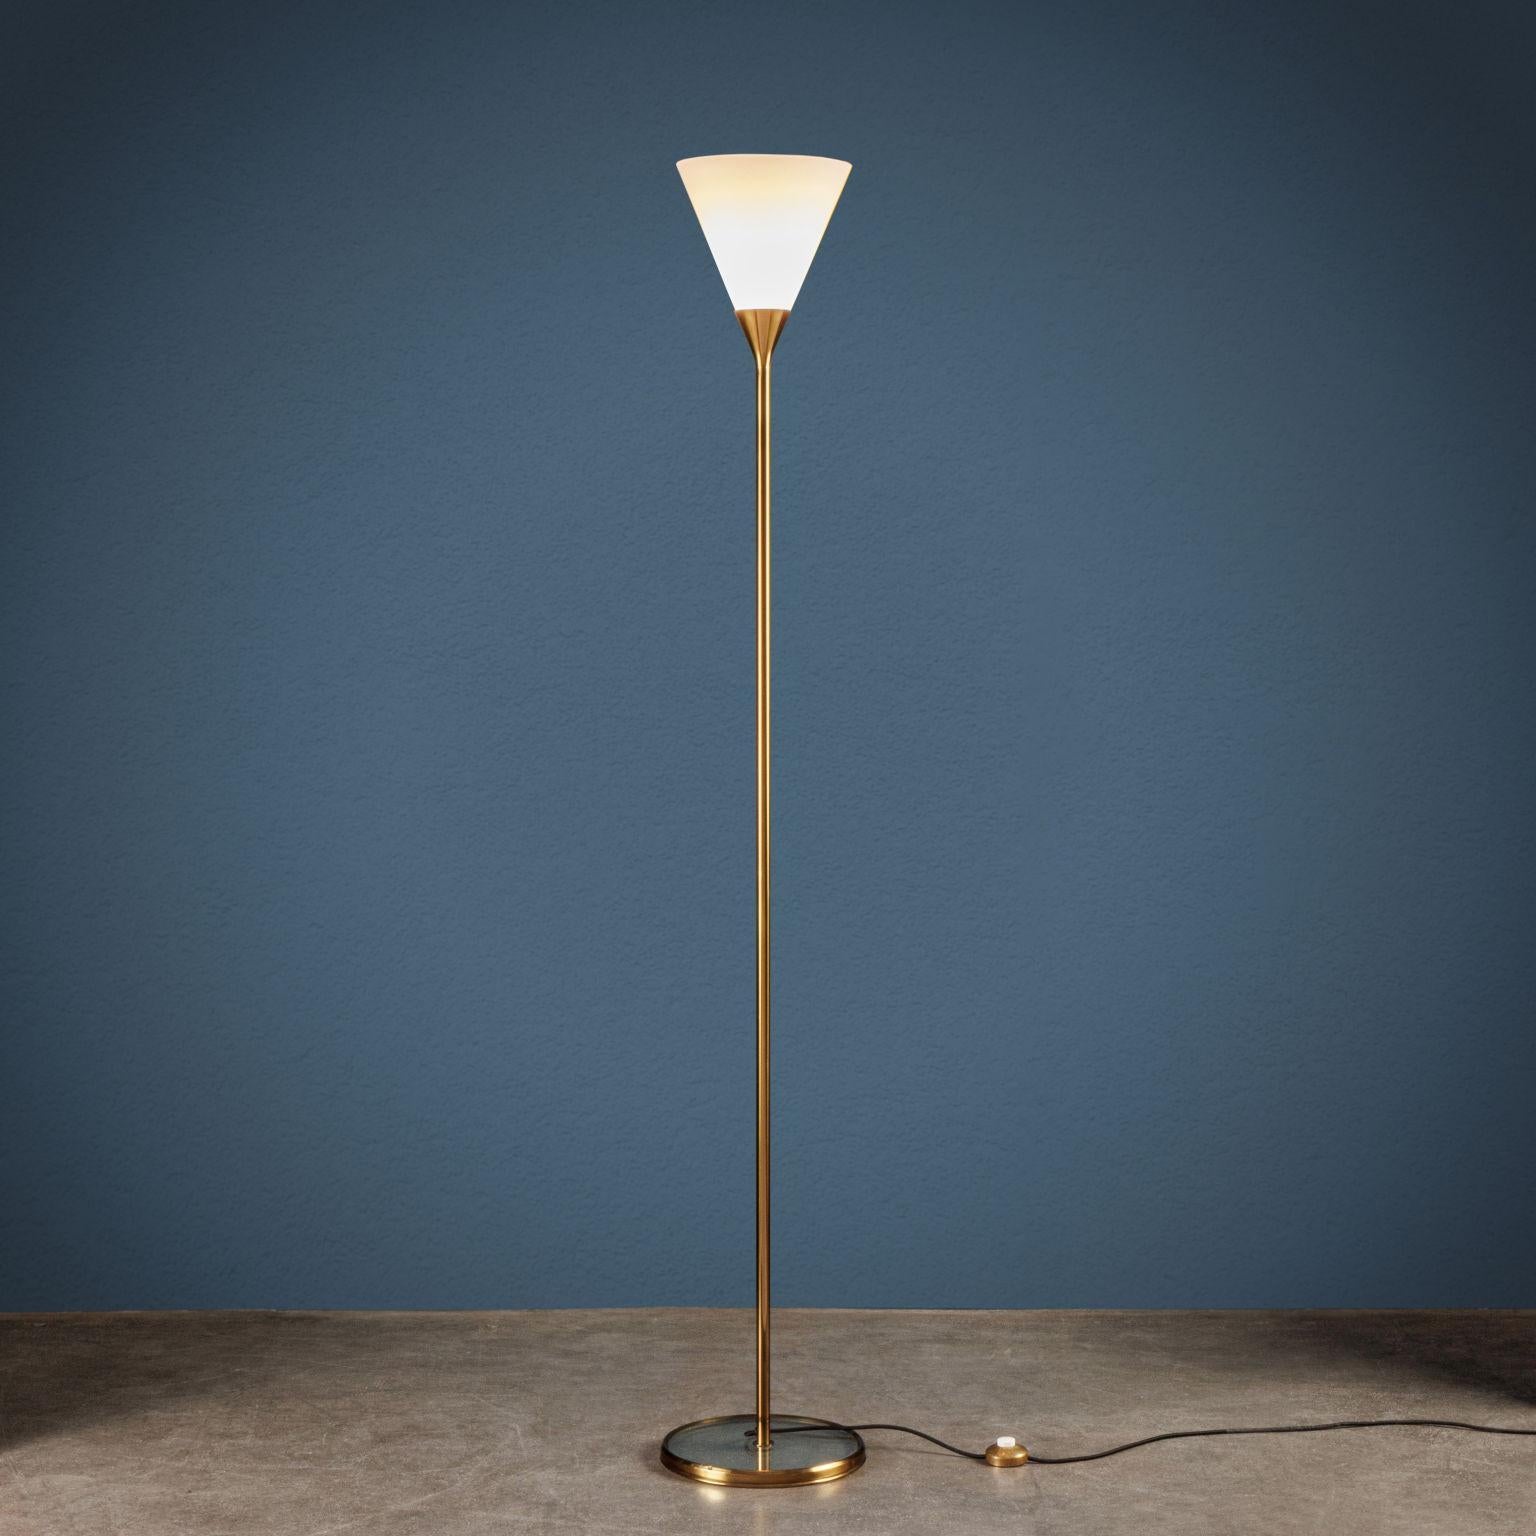 Model ‘2003’ floor lamp designed by Max Ingrand and produced by Fontana Arte in 1962. It has a brass profiled crystal base, a brass stem and a conical glass diffuser.